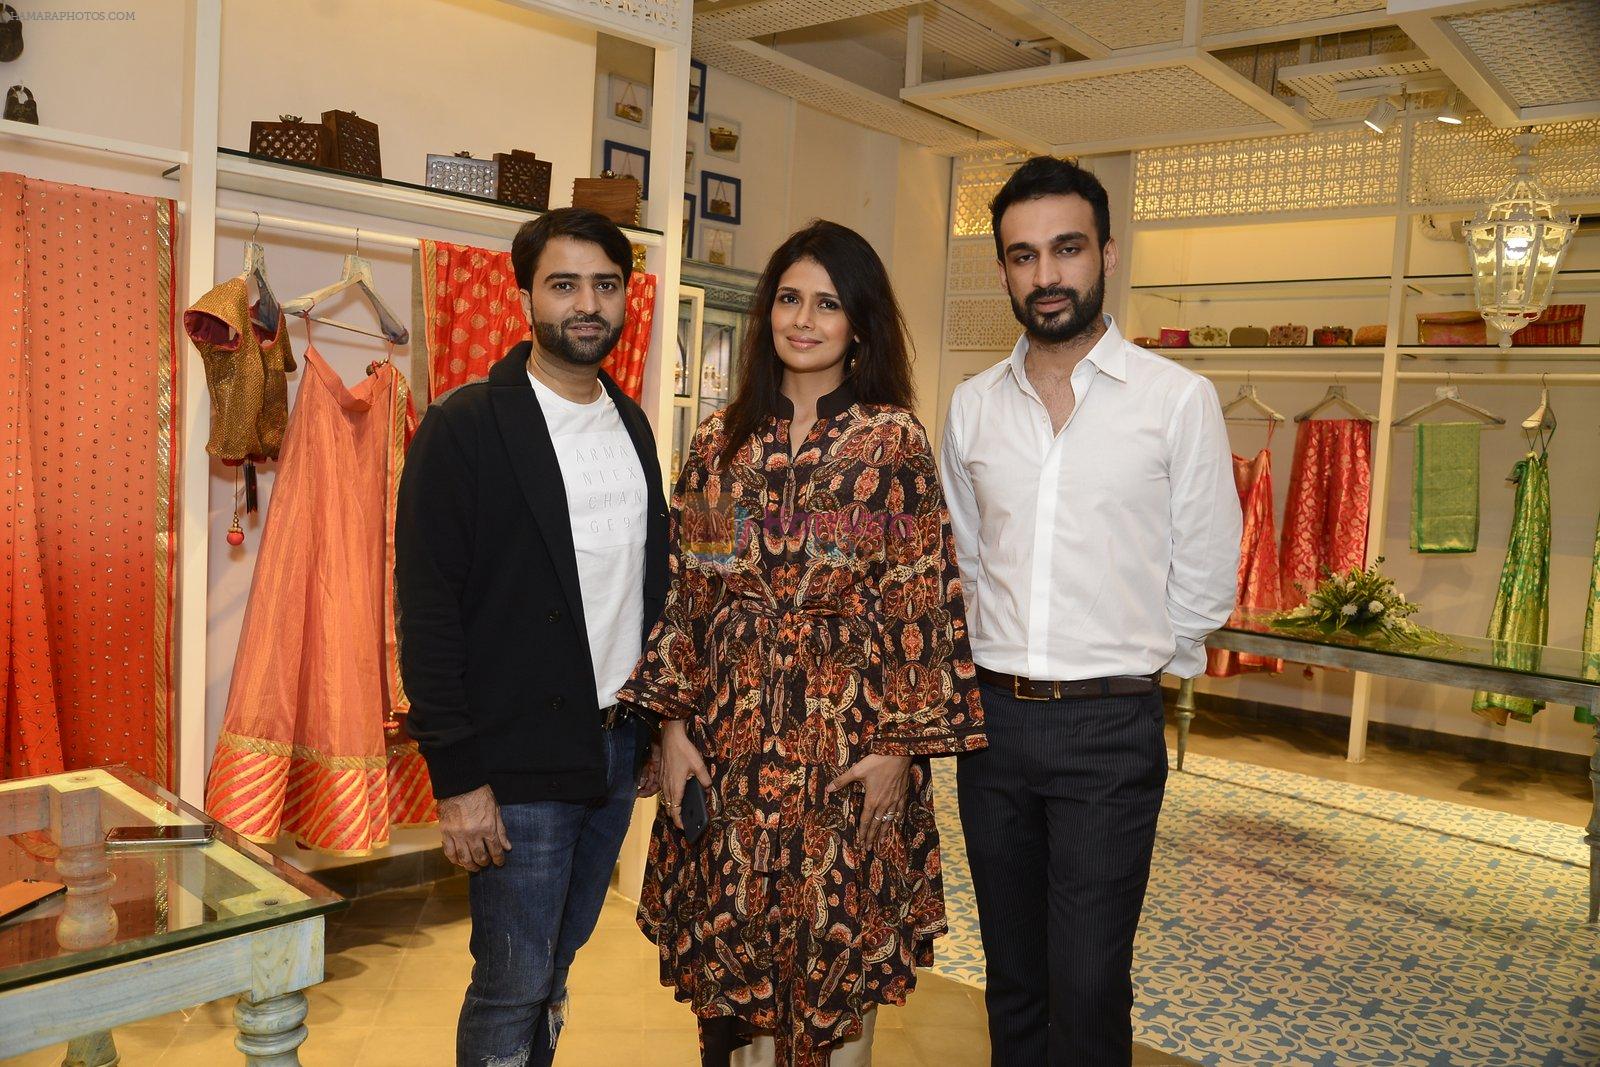 at Kashish Infiore store for Shruti Sancheti preview on 9th Aug 2016